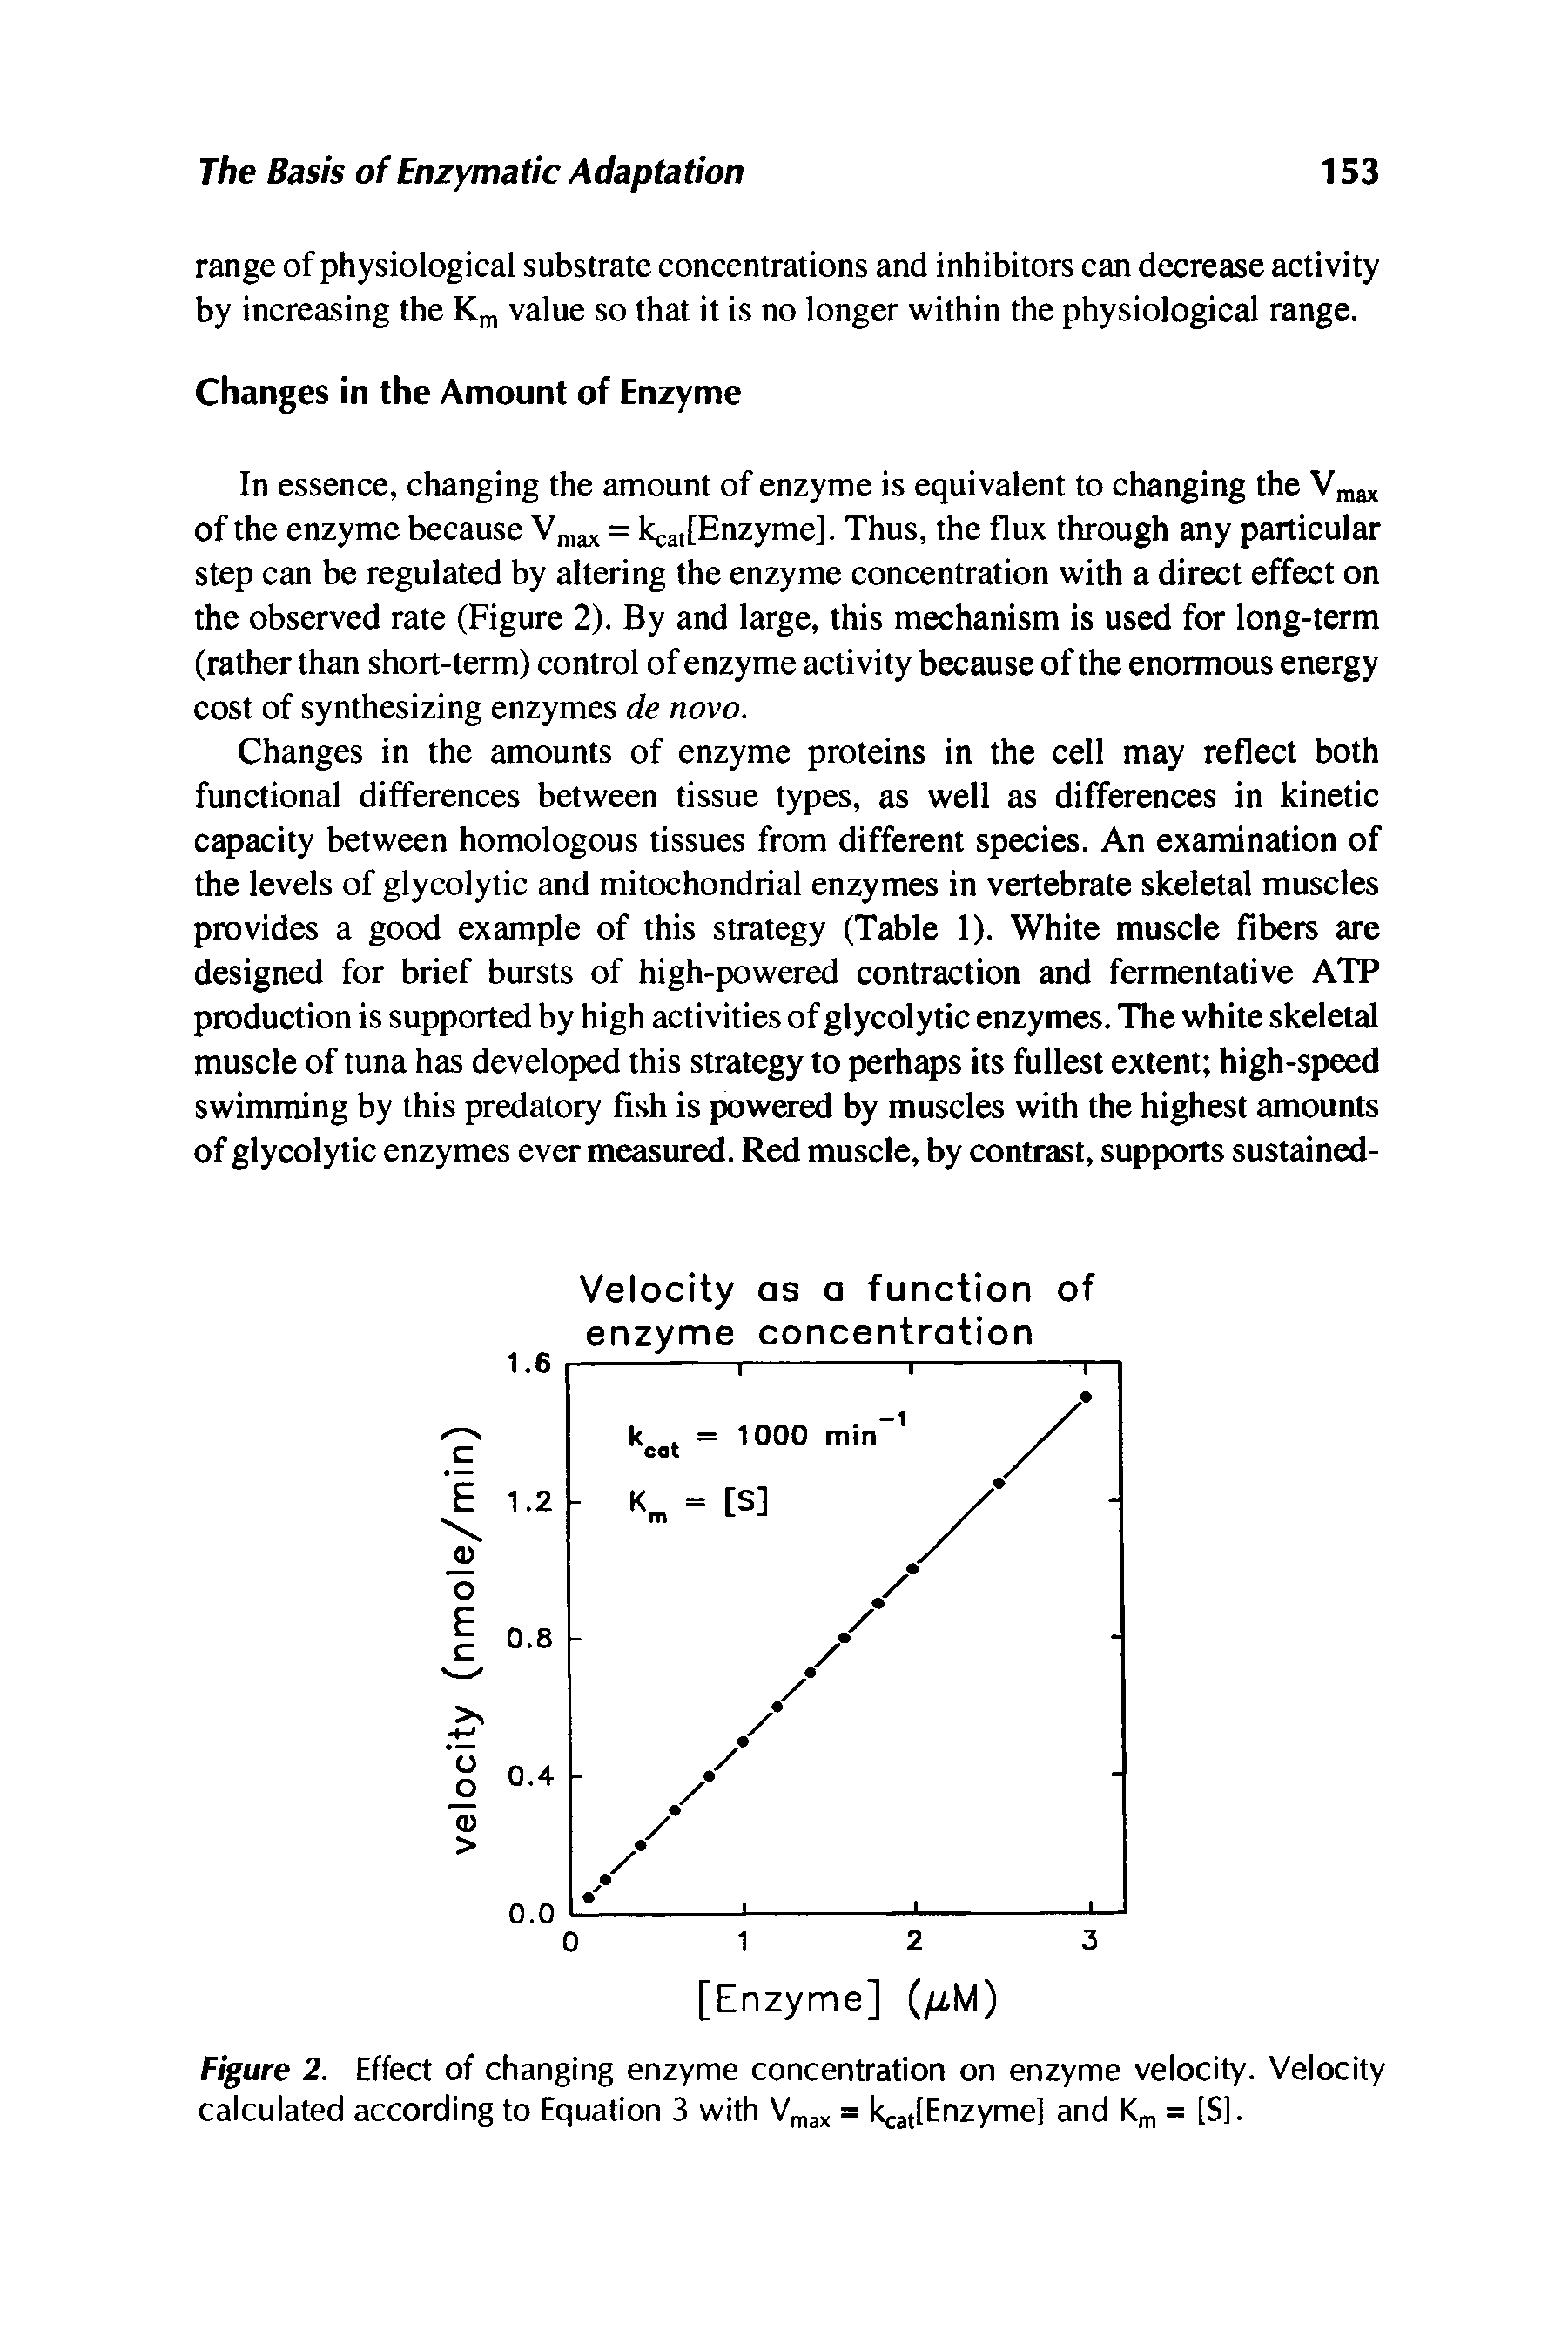 Figure 2. Effect of changing enzyme concentration on enzyme velocity. Velocity calculated according to Equation 3 with V ,ax = kcatlEnzyme] and K , = [S].